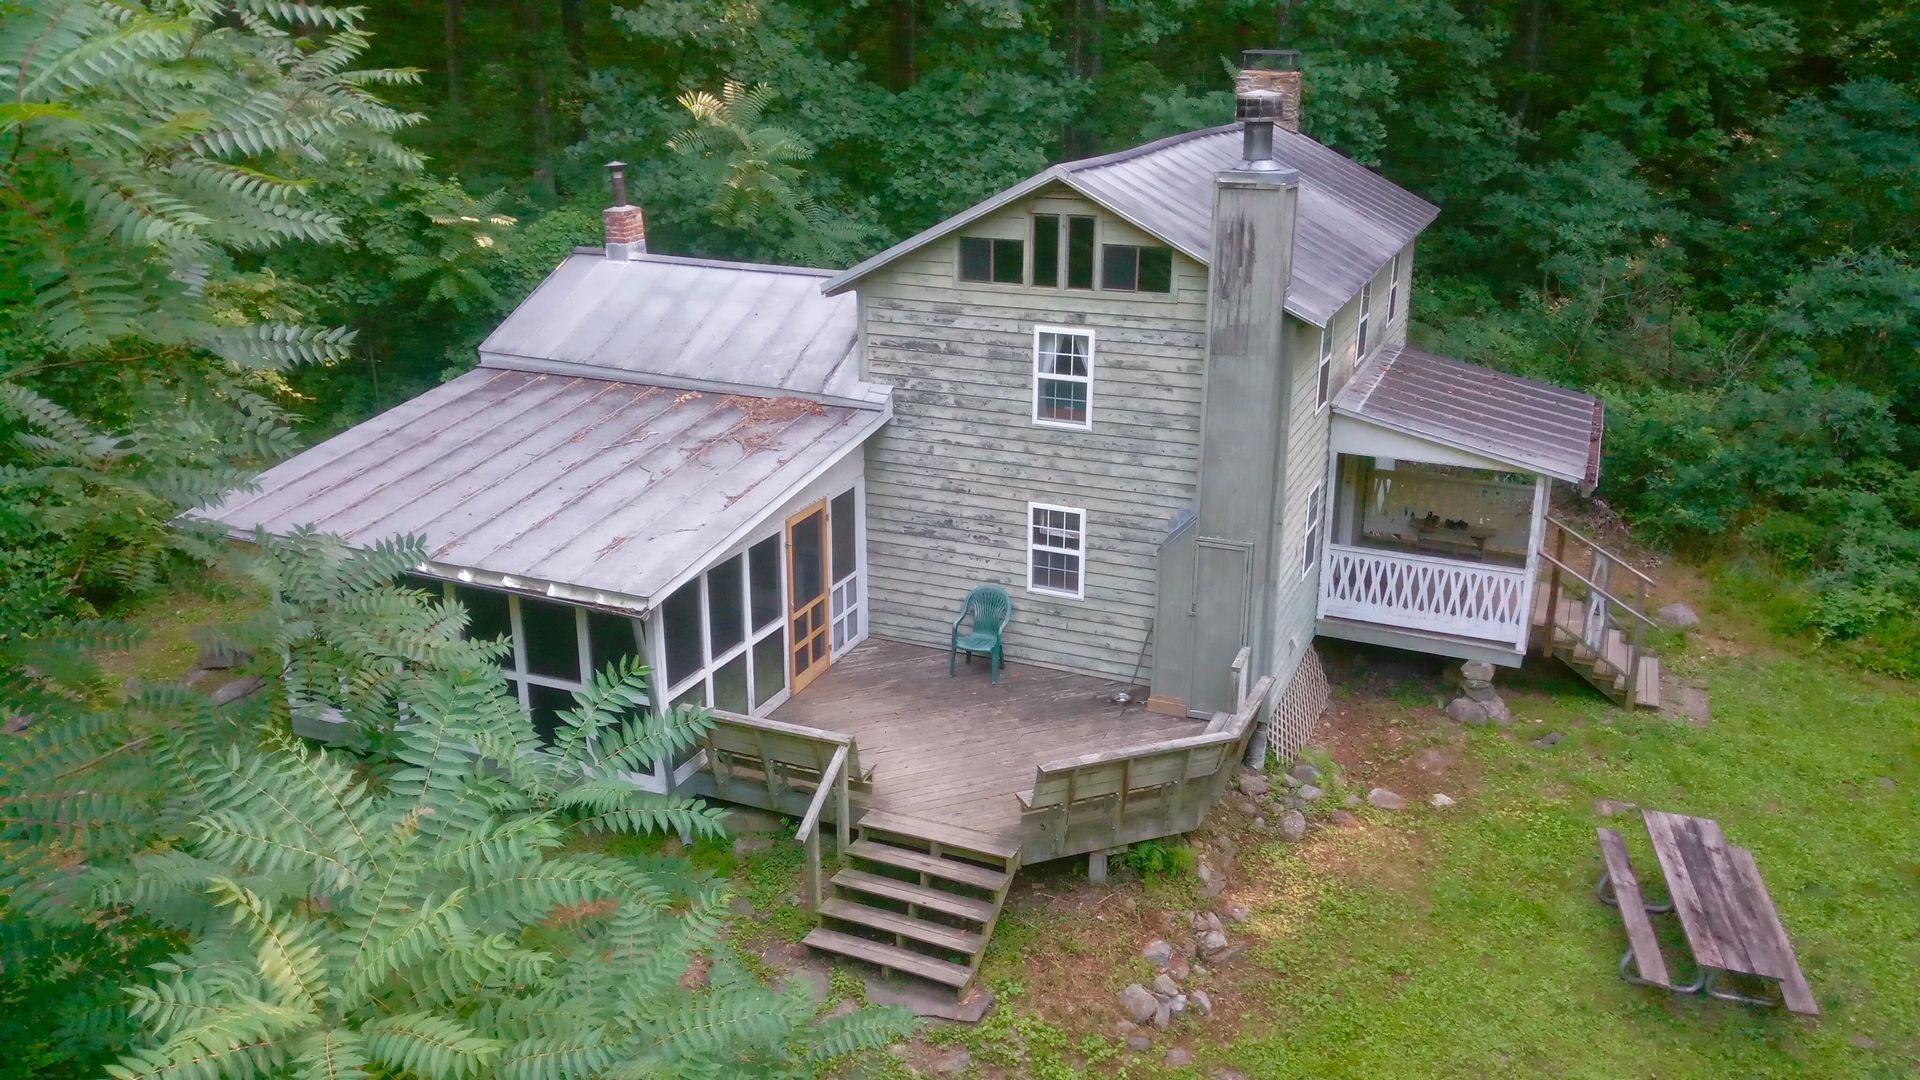 An aerial view of Rosser Lamb cabin shows a back wooden porch and a screened in seated area.